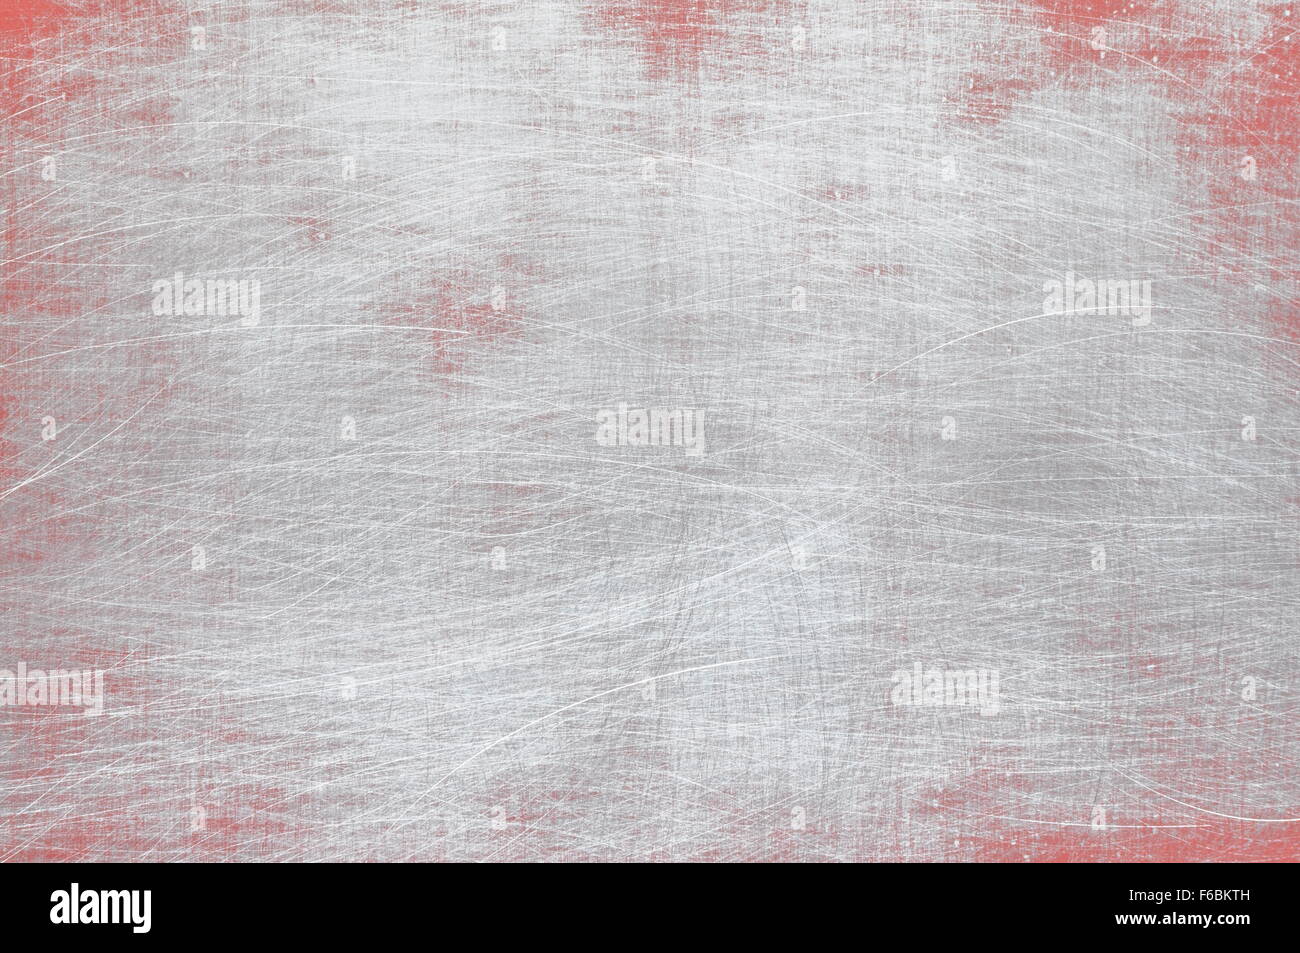 Red and gray metal background, texture Stock Photo